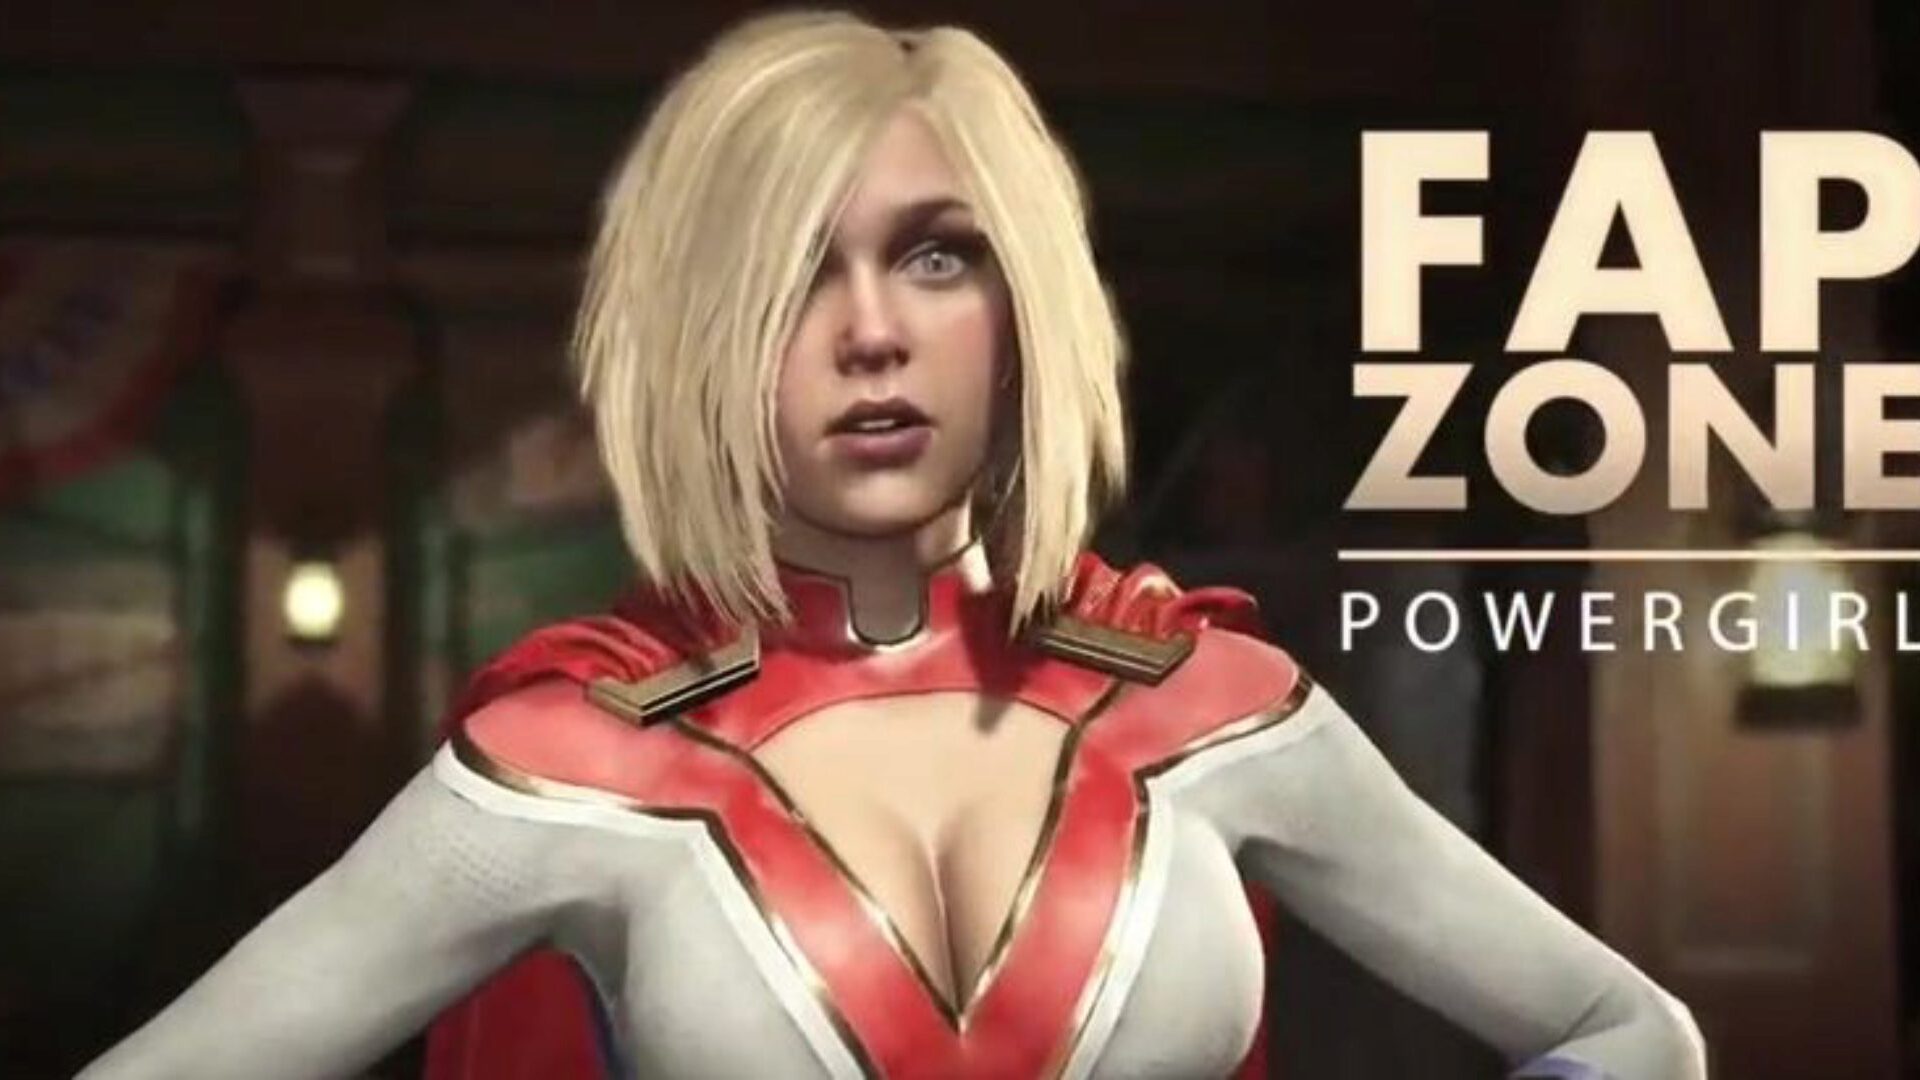 FapZone // Vigour Beauty (Injustice two